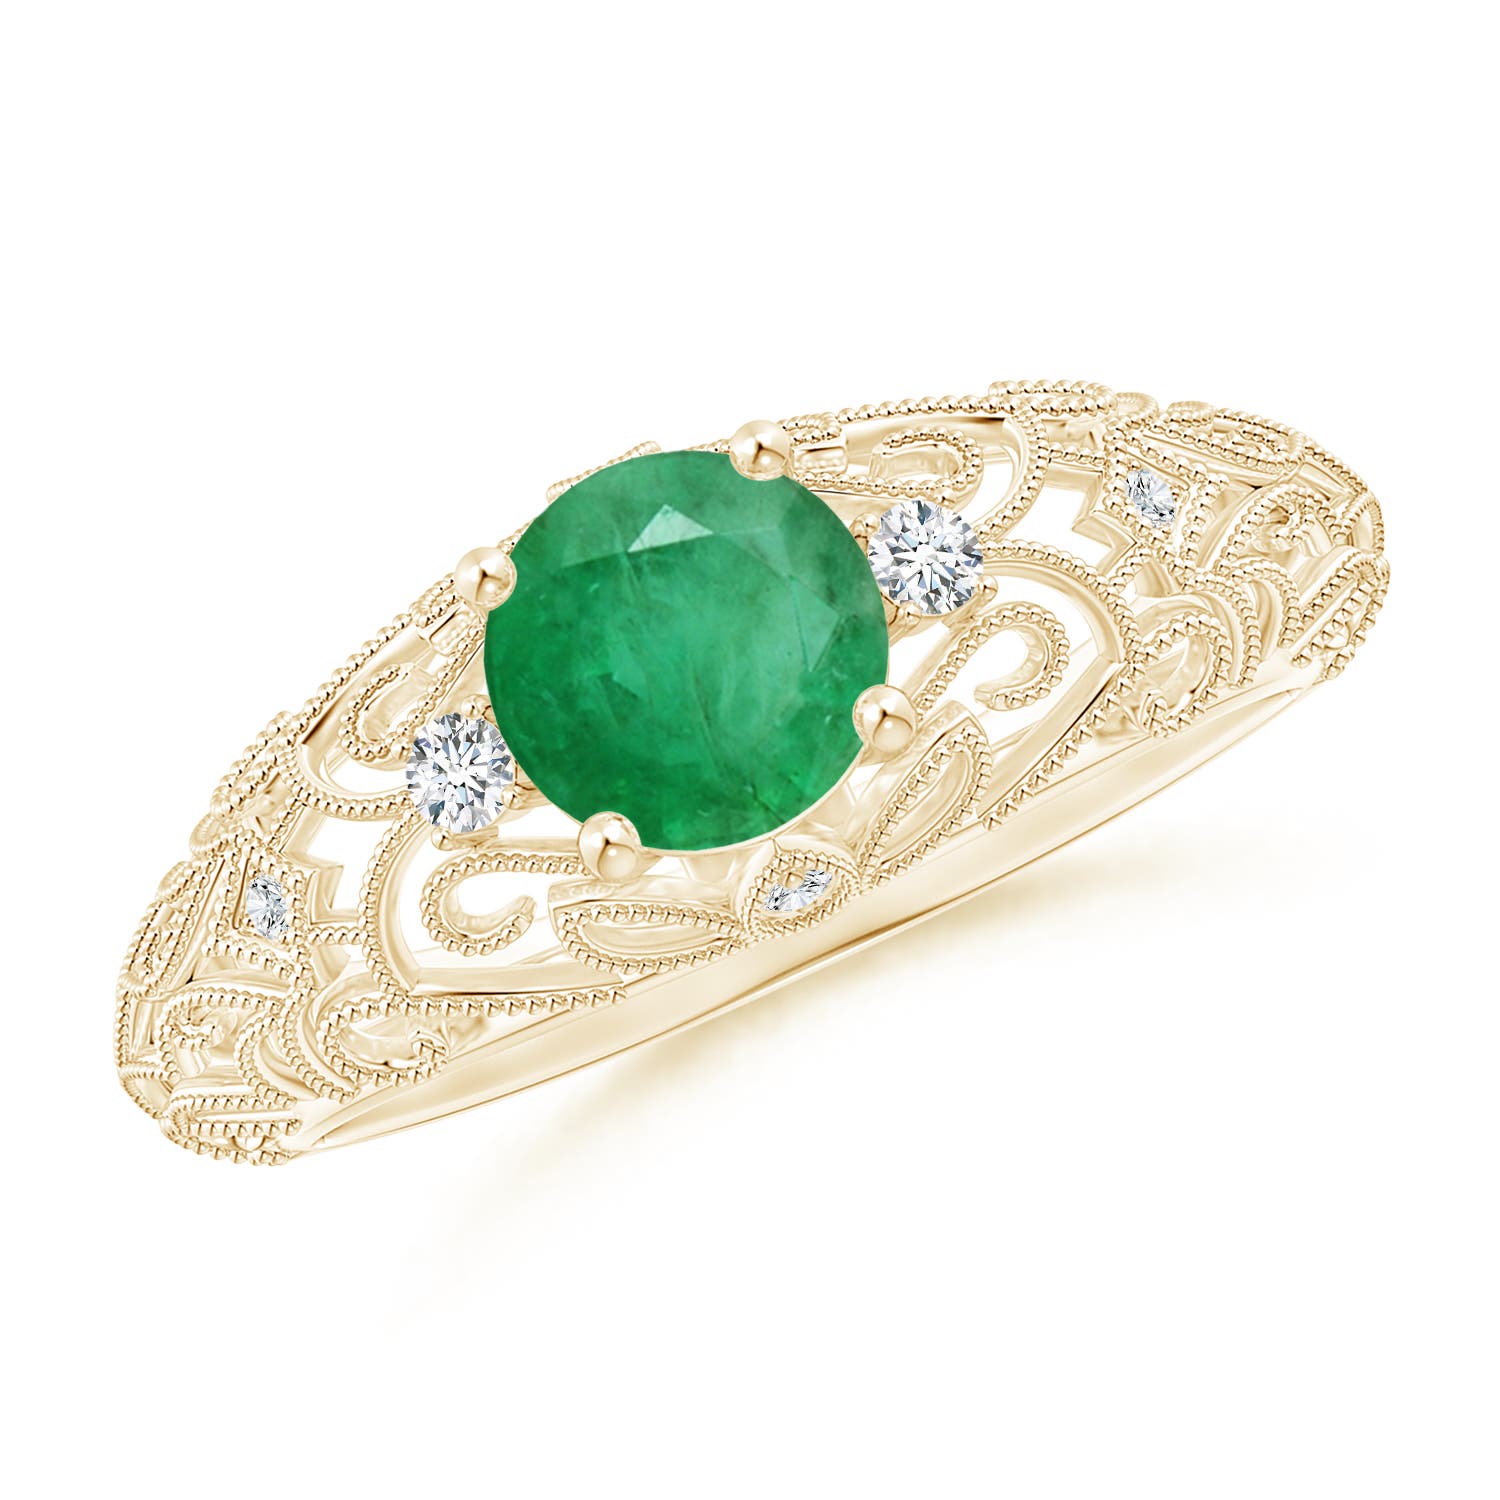 A - Emerald / 0.82 CT / 14 KT Yellow Gold